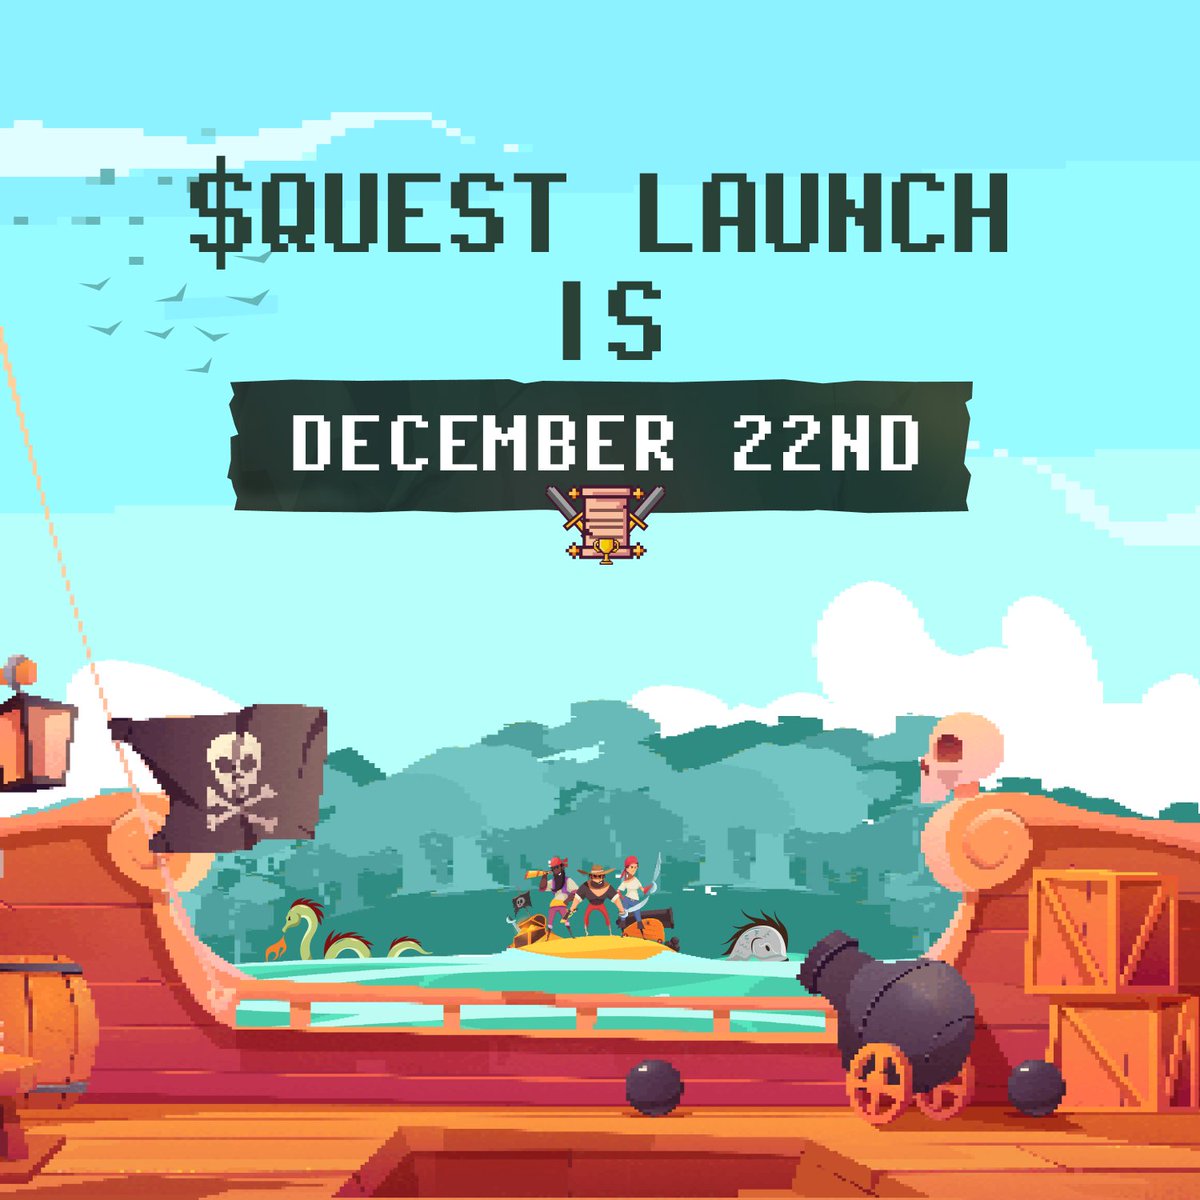 🚢 $QUEST launch details:

🗓️ December 22nd
⏰ 2-4pm EST

See you there mateys!